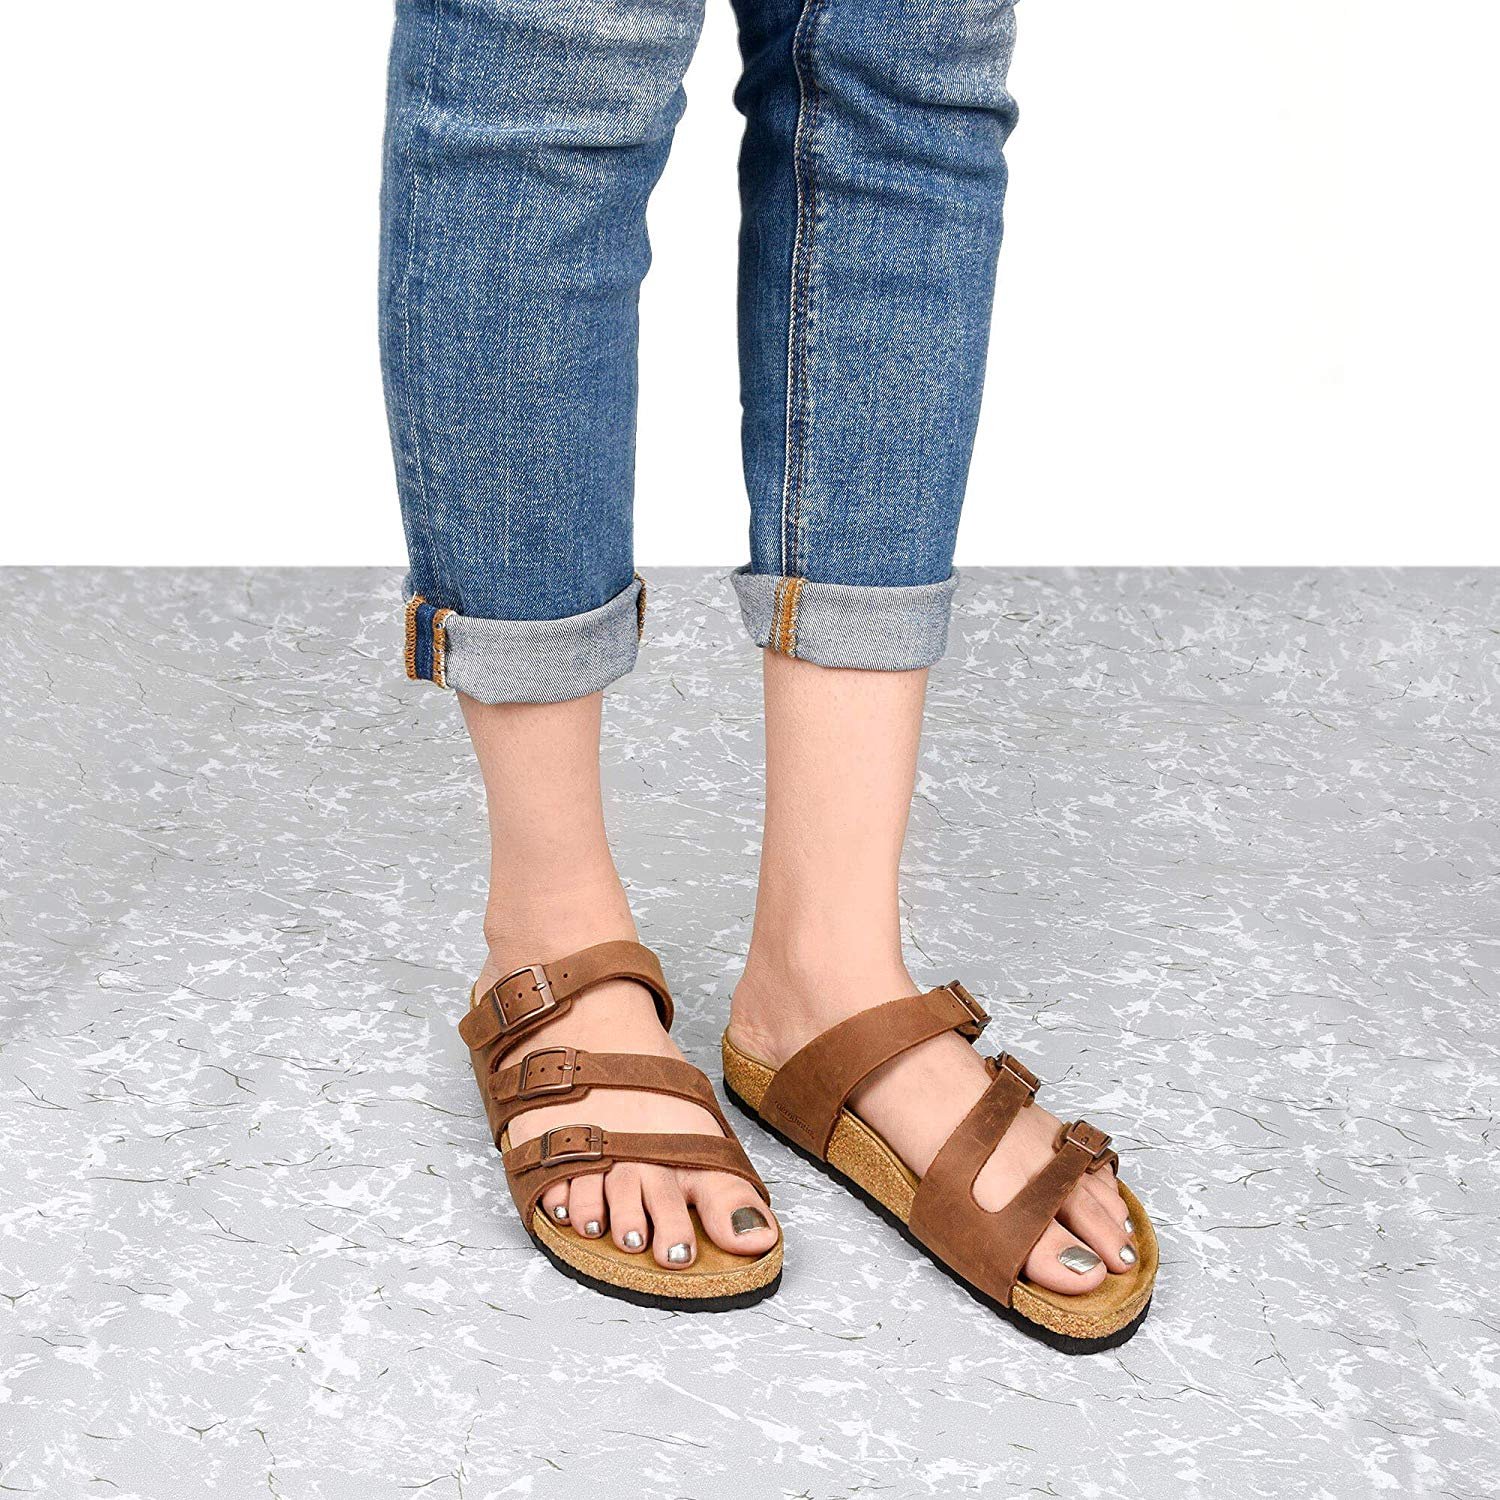 great arch support sandals